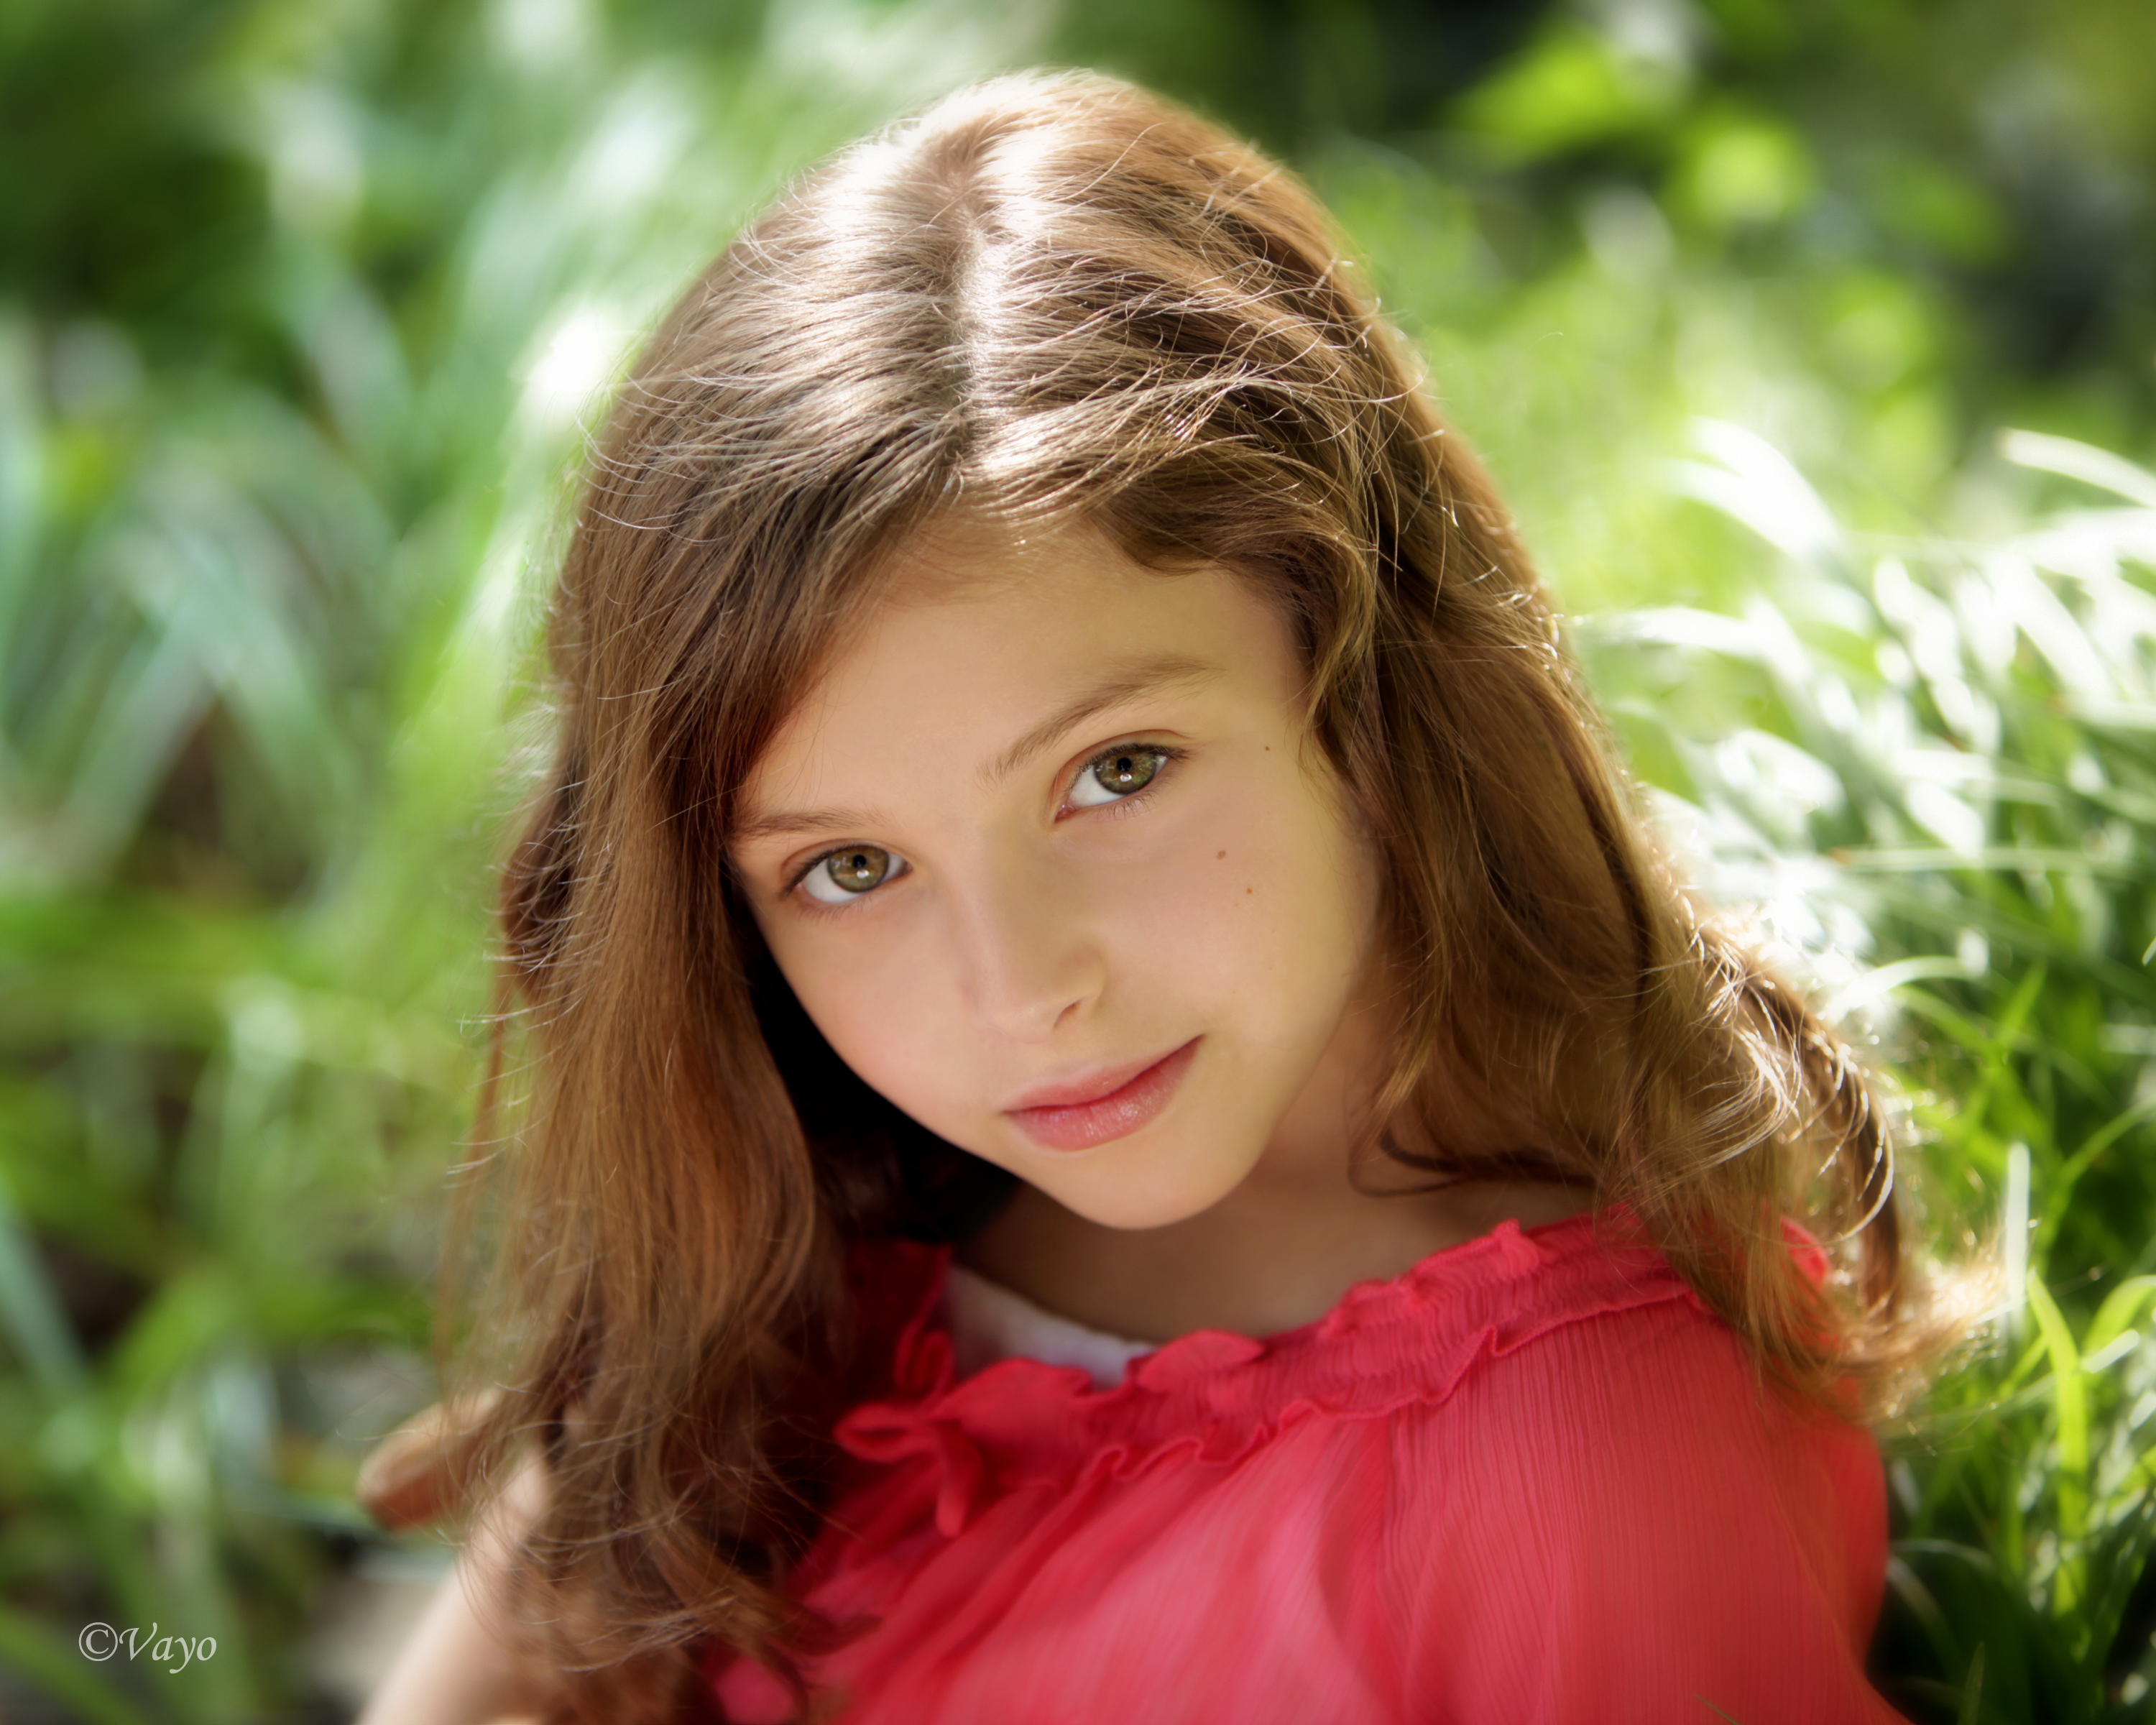 Madison's first screen role came with the made for television movie 